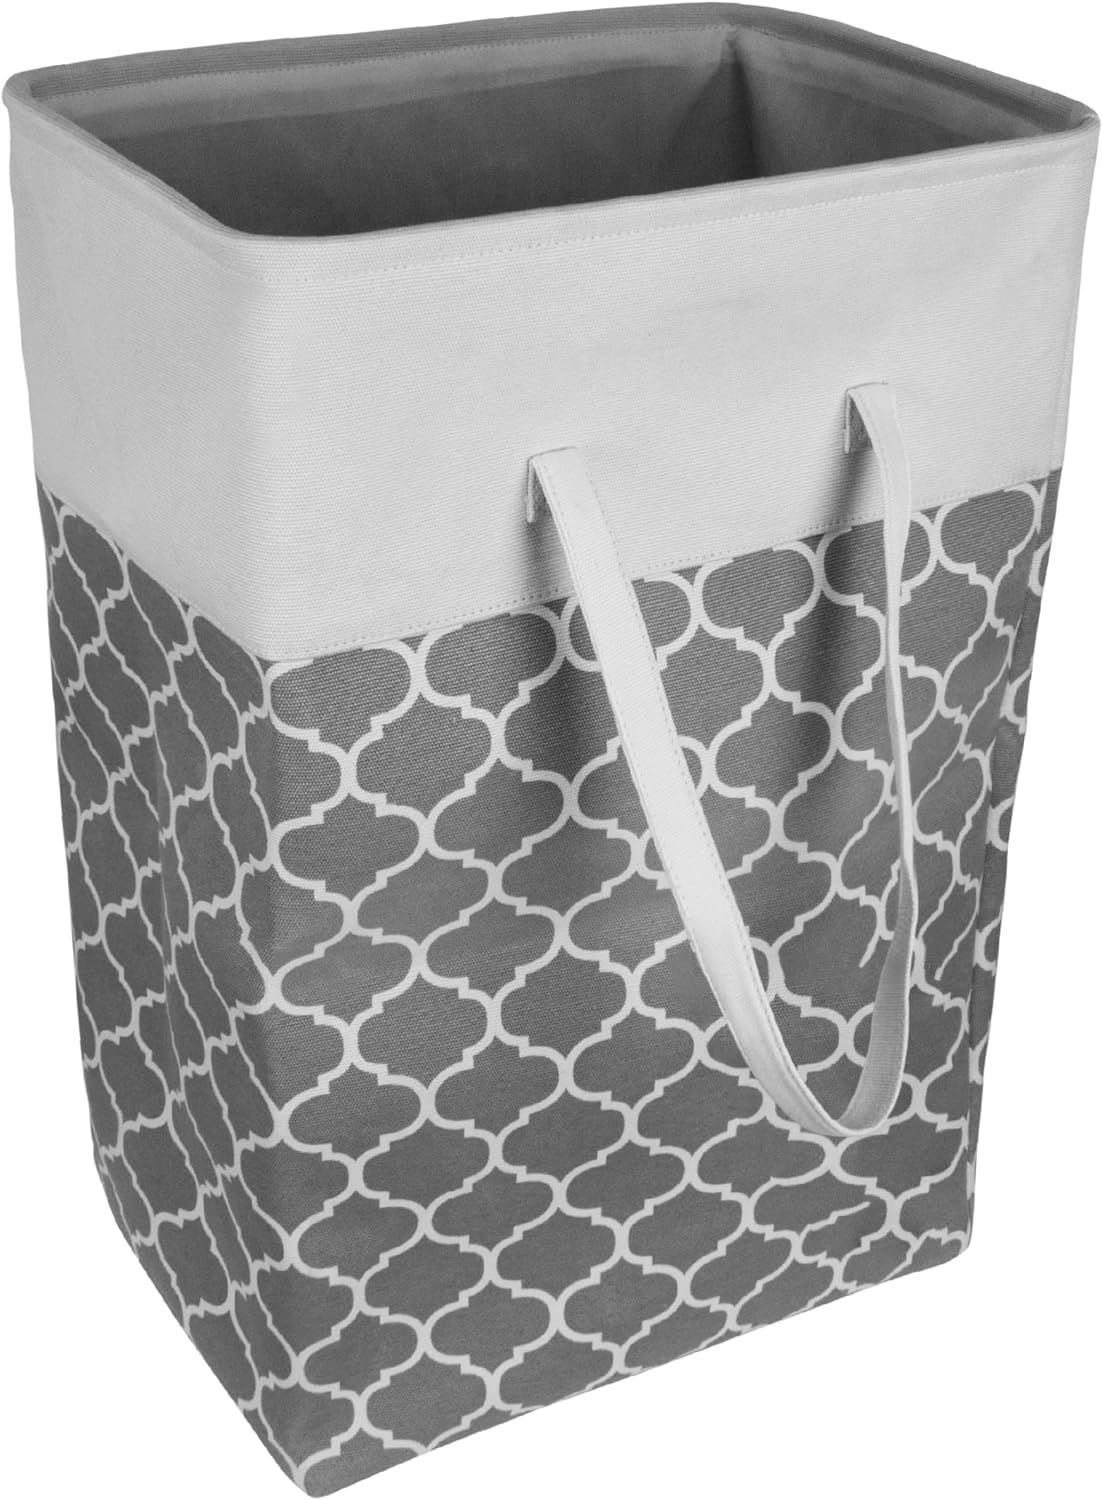 Brookstone Large Laundry Hamper with Handles, Gray/White